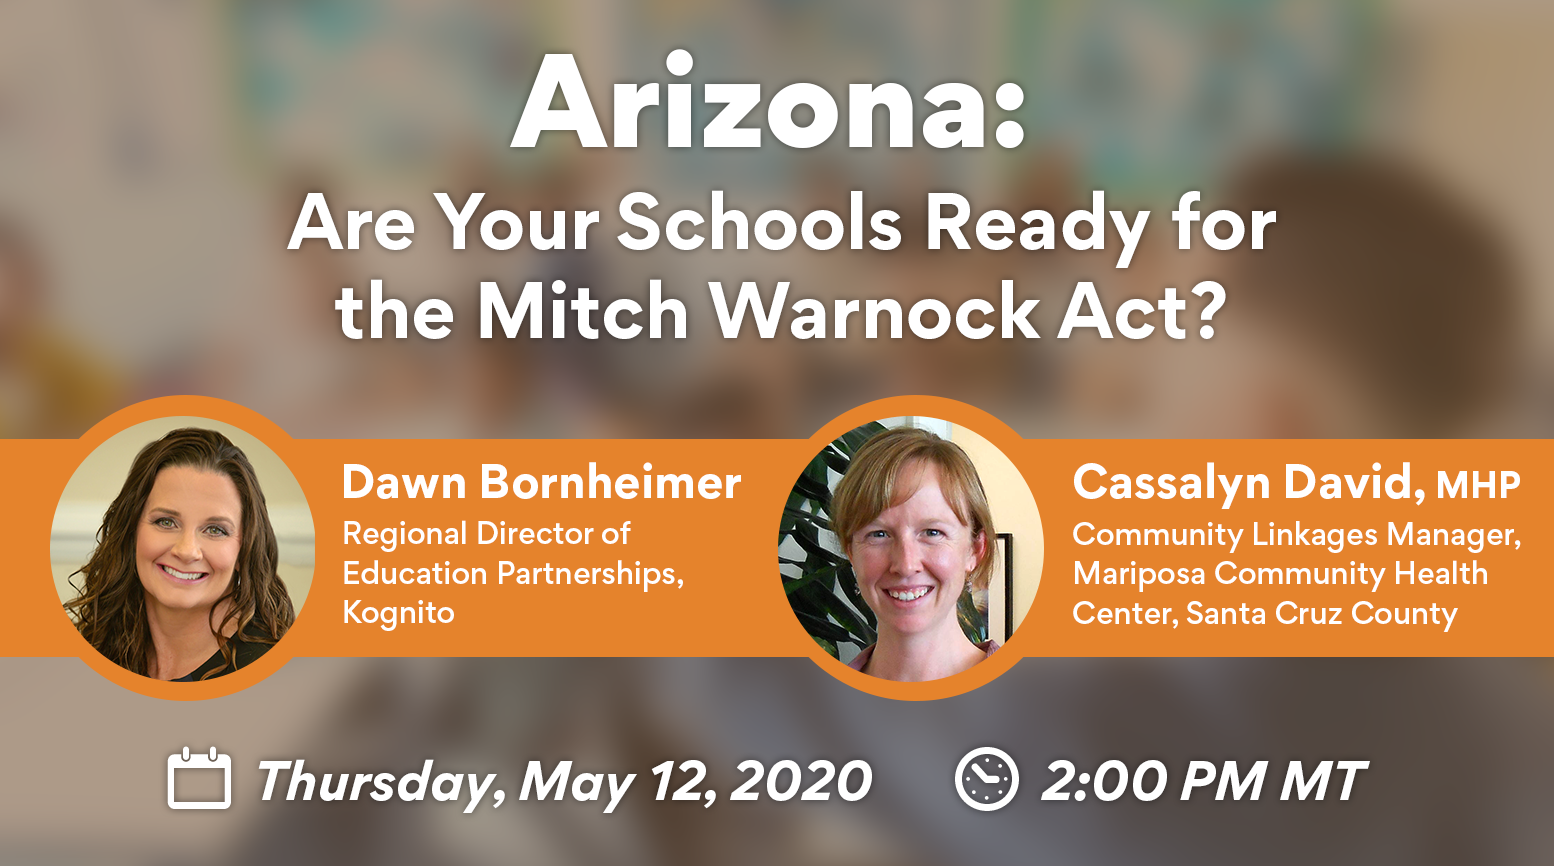 Arizona: Are Your Schools Ready for the New Suicide Prevention Training Law?